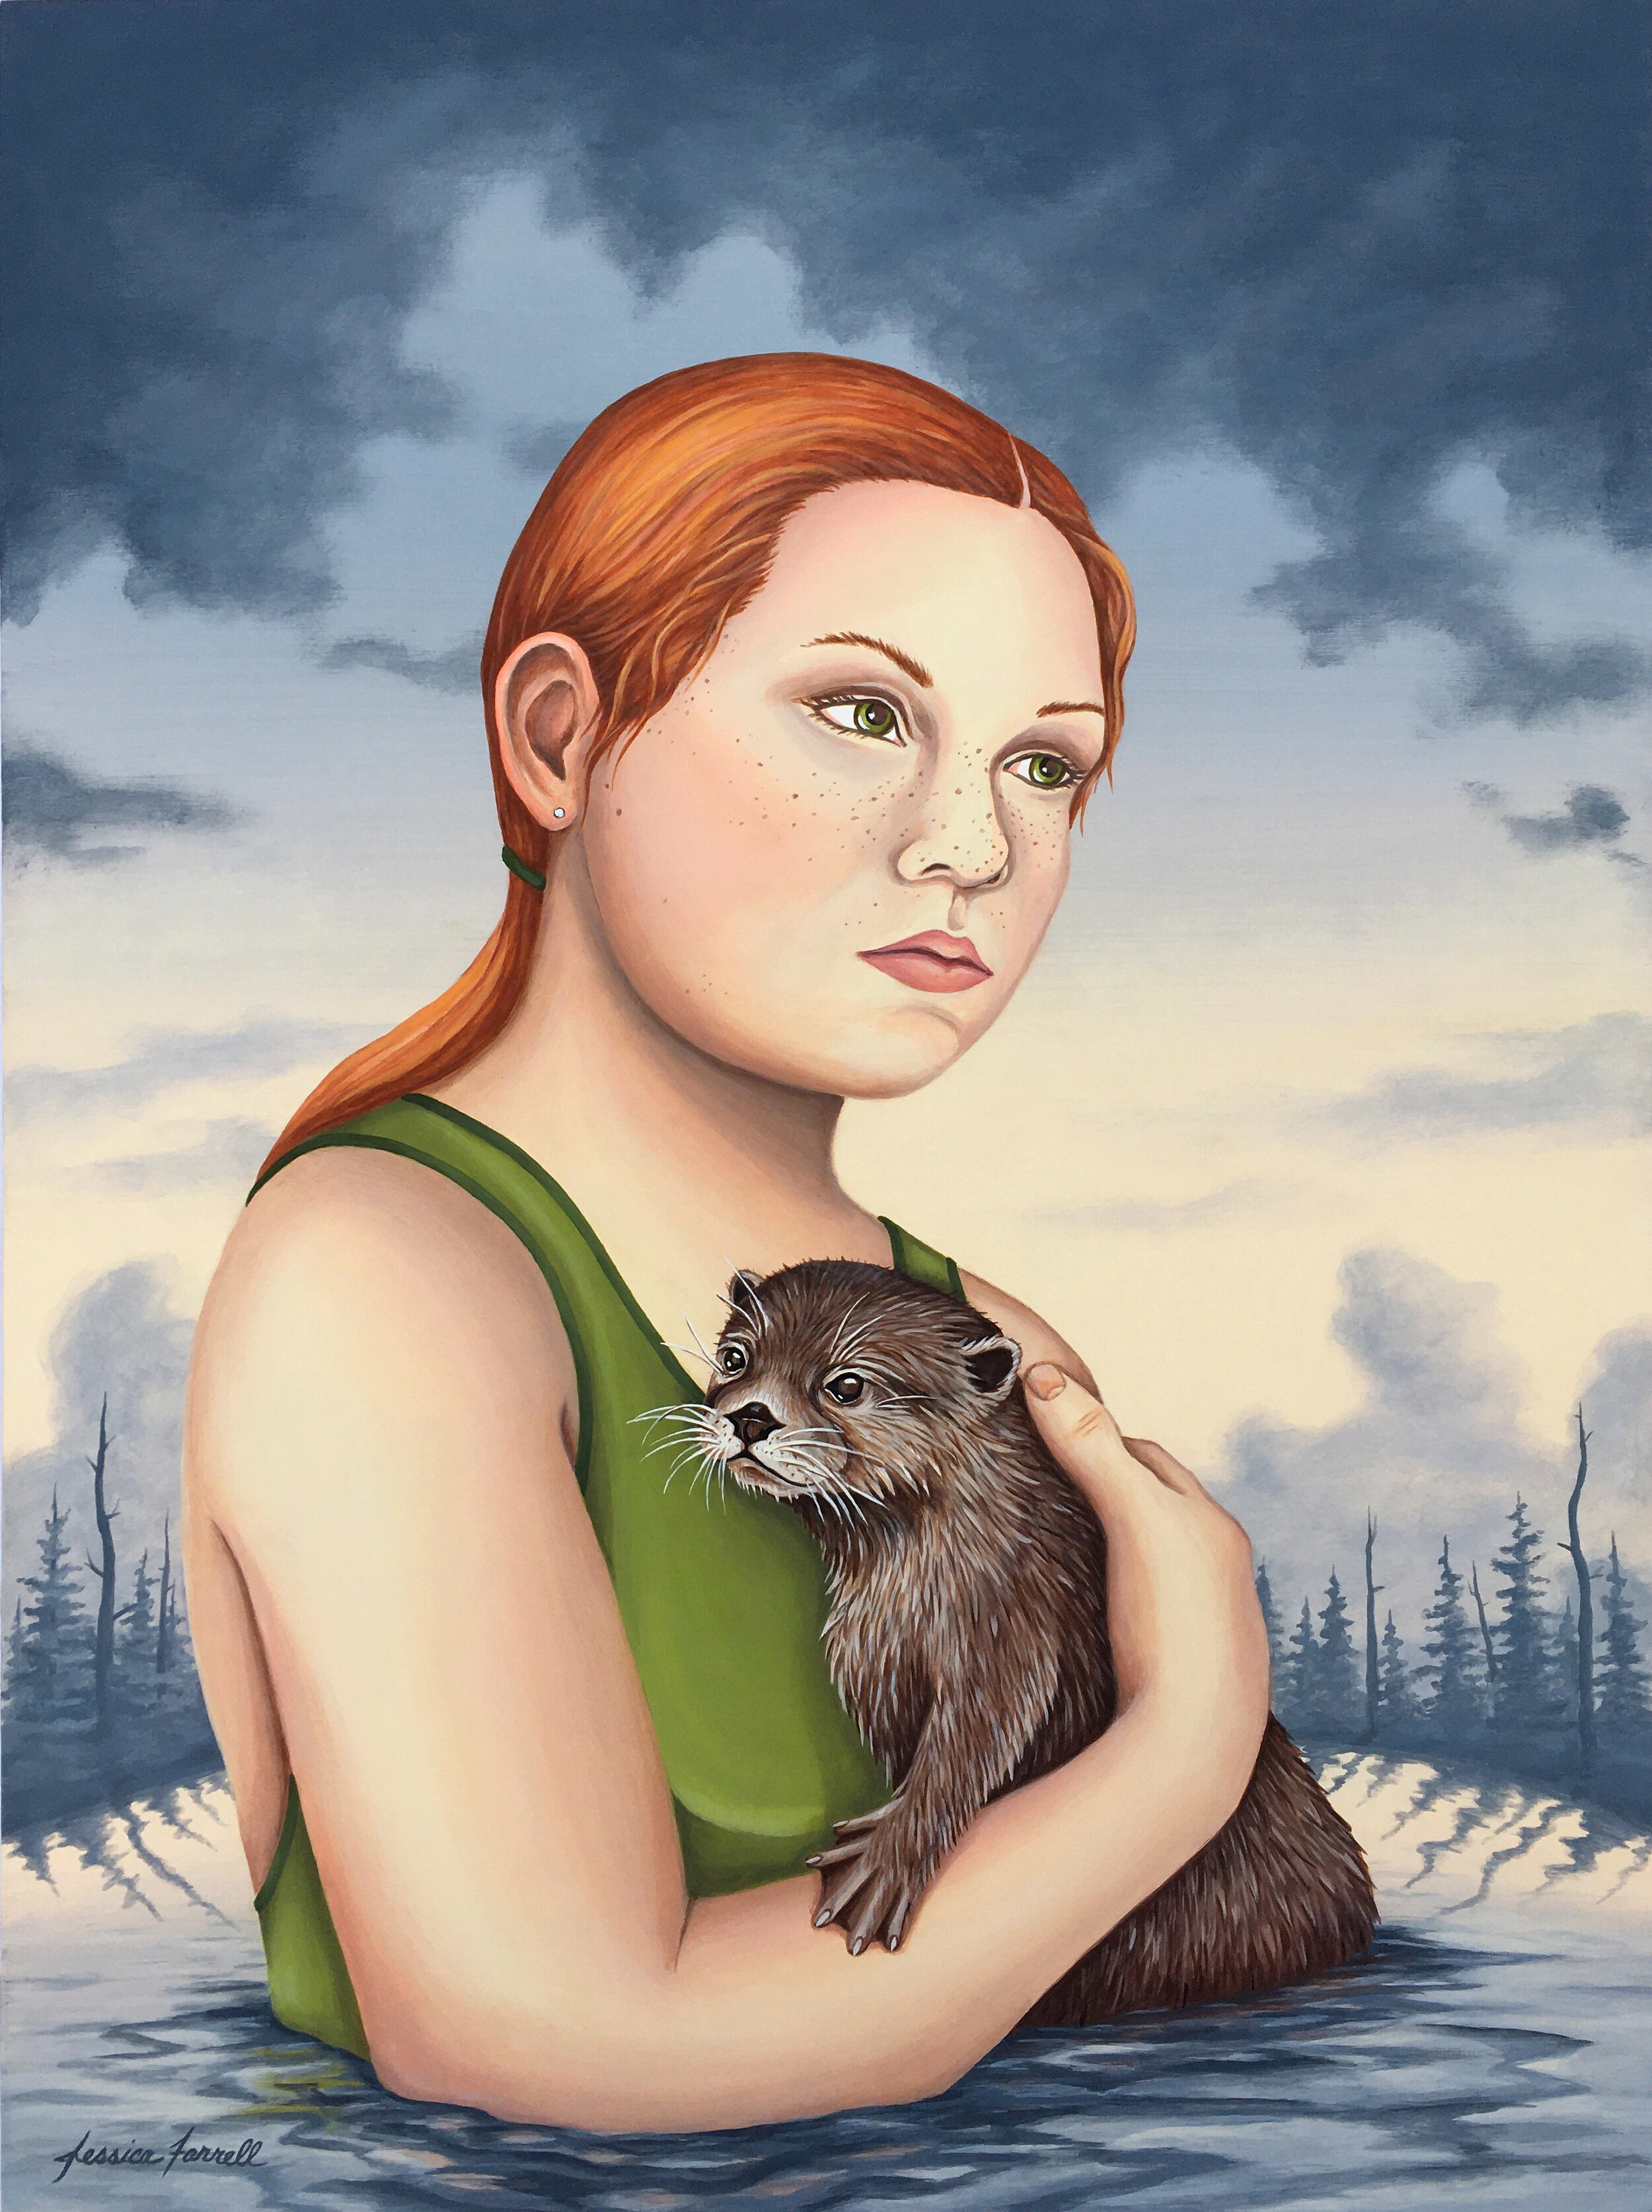  Bethel &amp; River Otter, 2020  Acrylic on wood  24 x 18 inches (unframed)  31 x 25 inches (framed) 